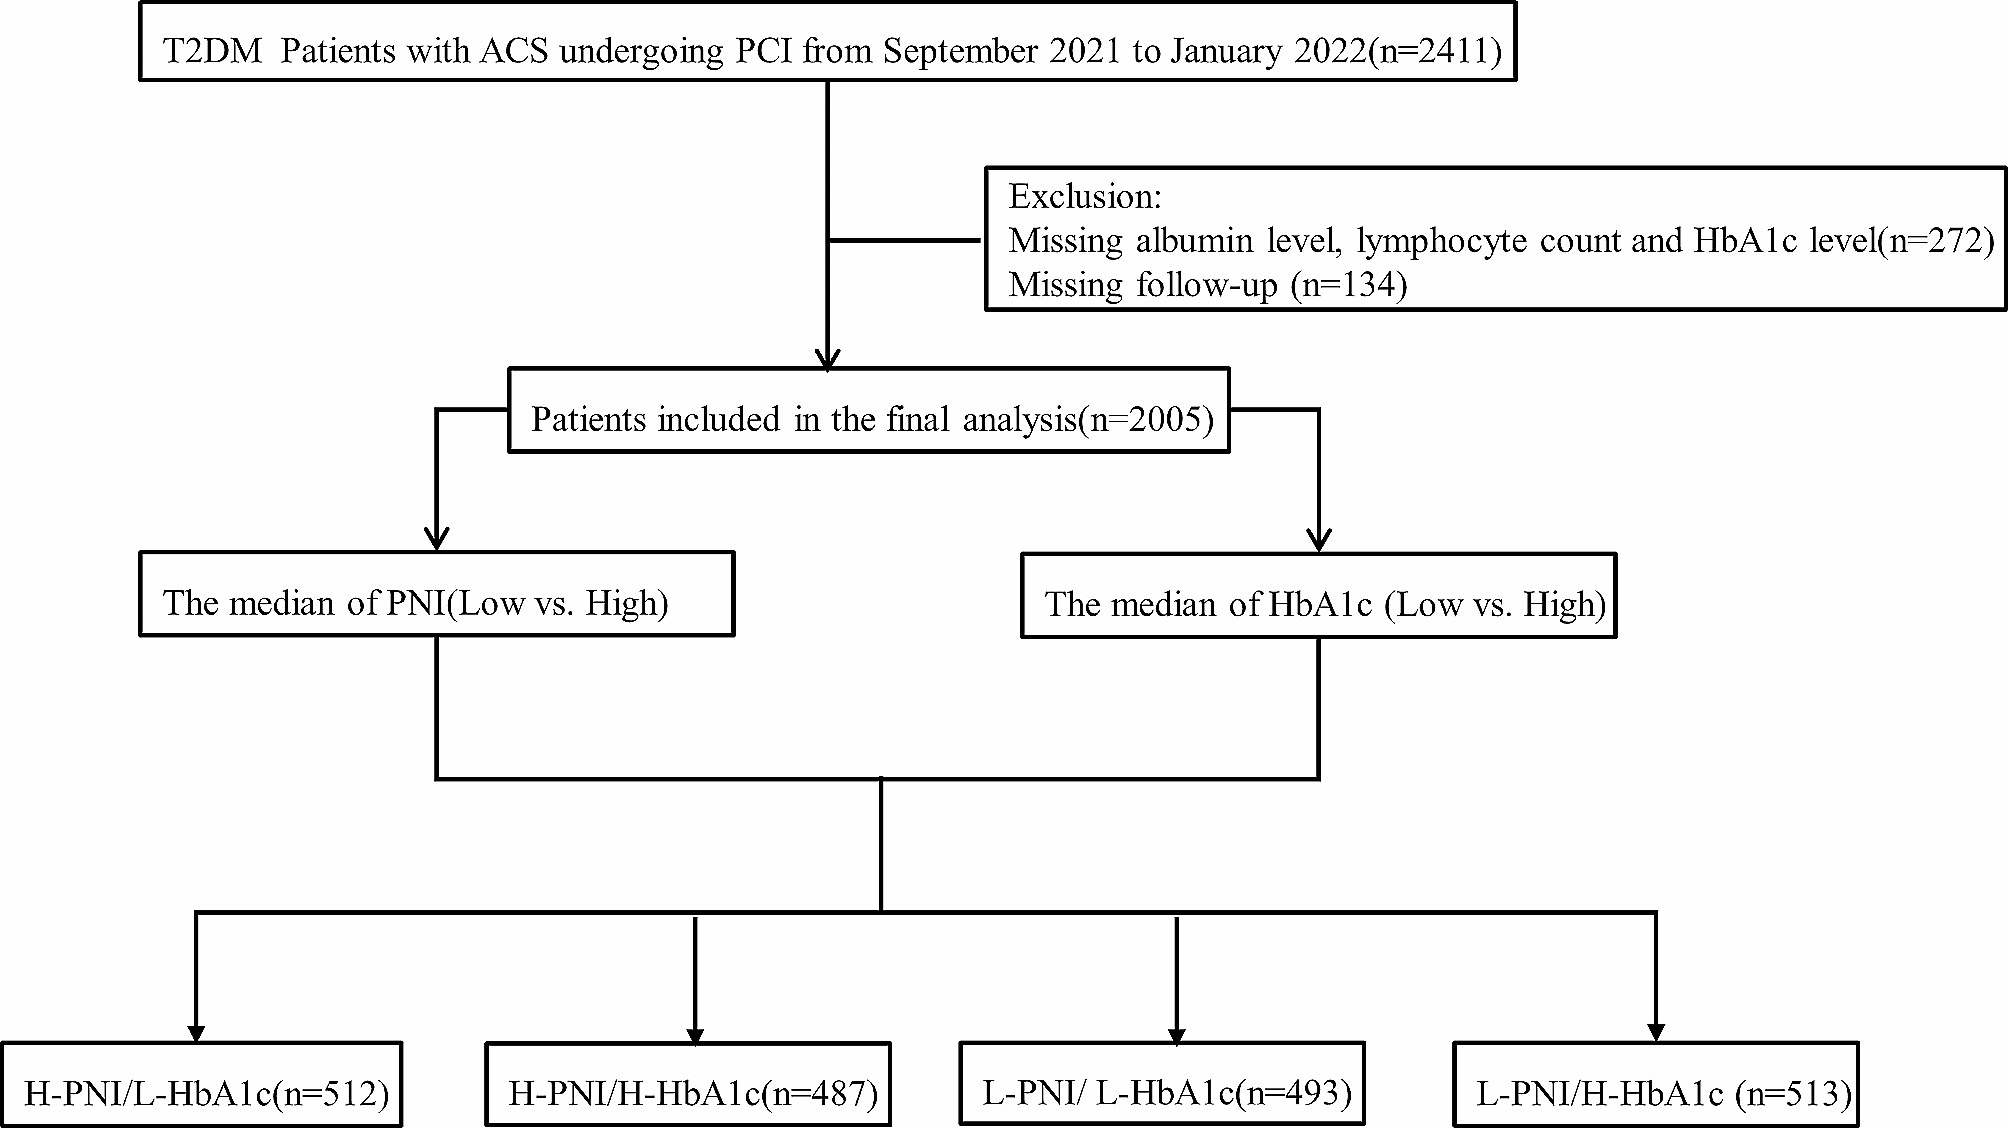 Combination of the glycated hemoglobin levels and prognostic nutritional index as a prognostic marker in patients with acute coronary syndrome and type 2 diabetes mellitus